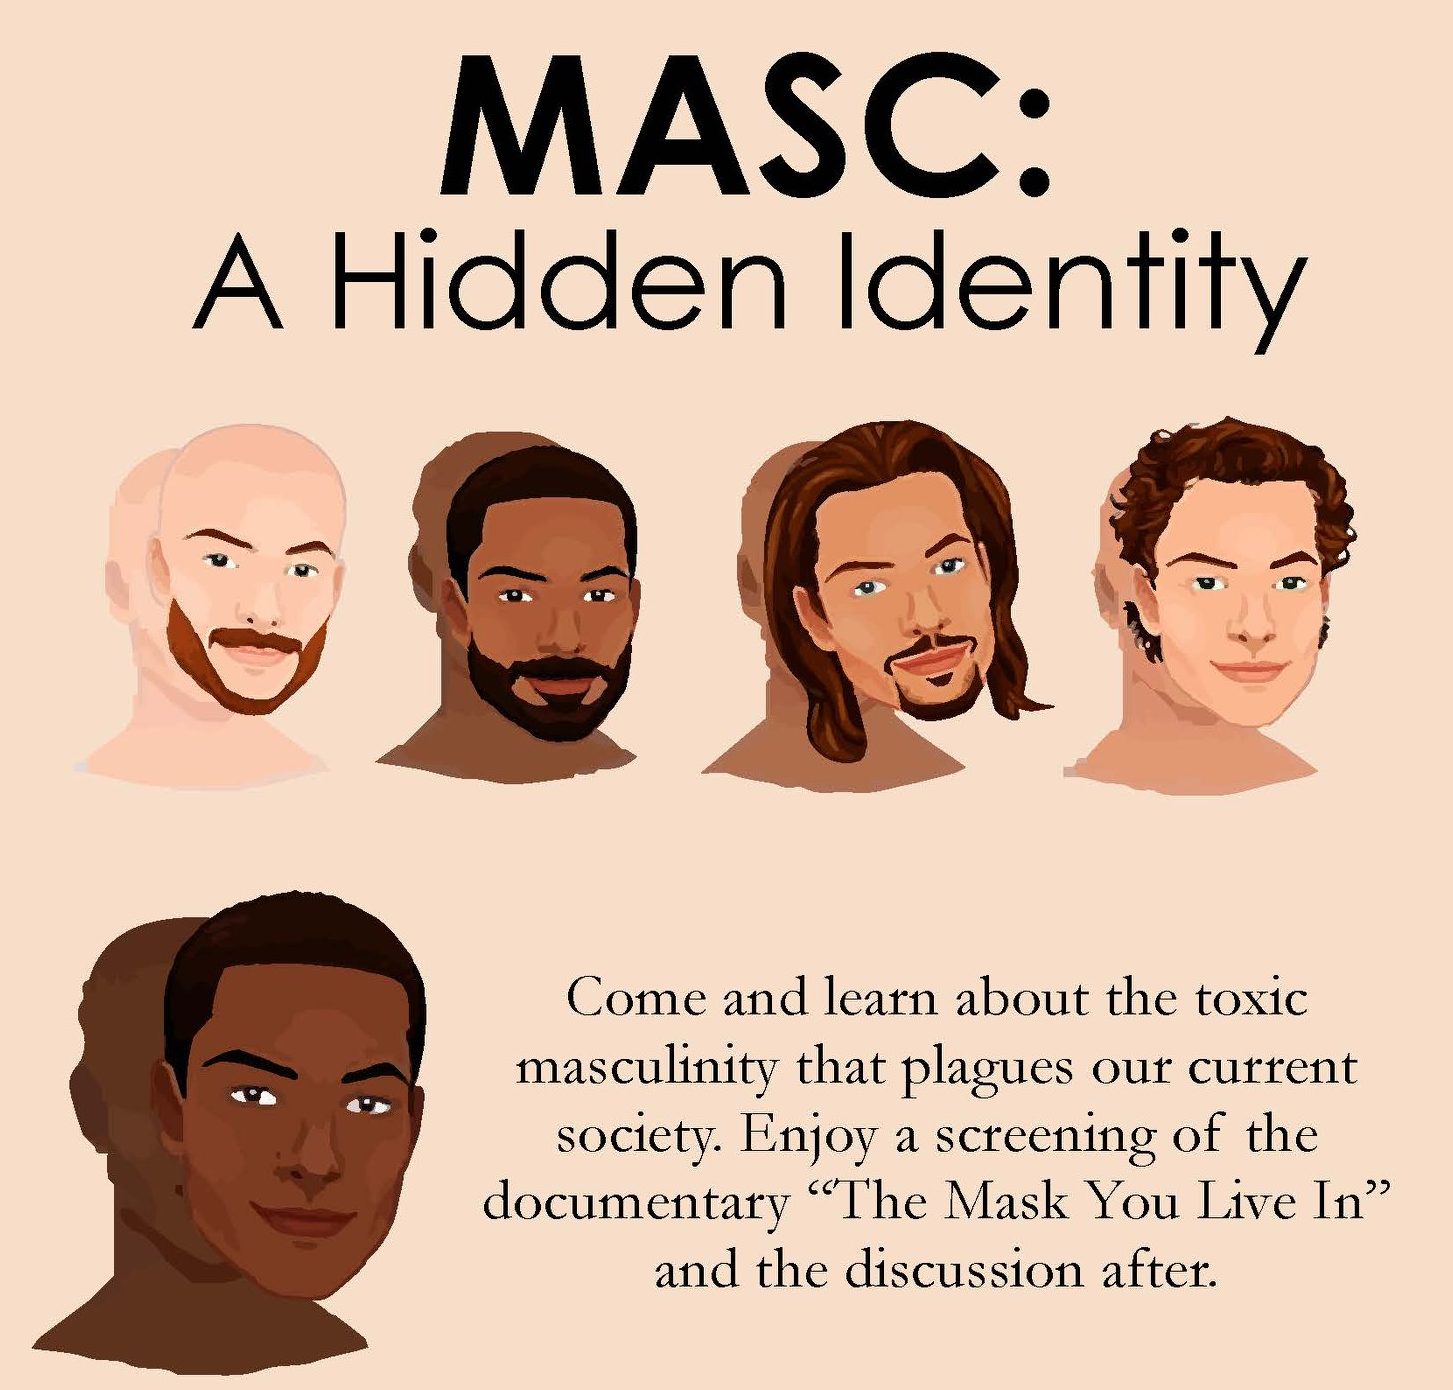 GRAPHIC: "MASC: A Hidden Identity" featured the screening of "The Mask You Live In" and discussion of toxic masculinity. Graphic courtesy of UHCL Office of Student Diversity, Equity and Inclusion.